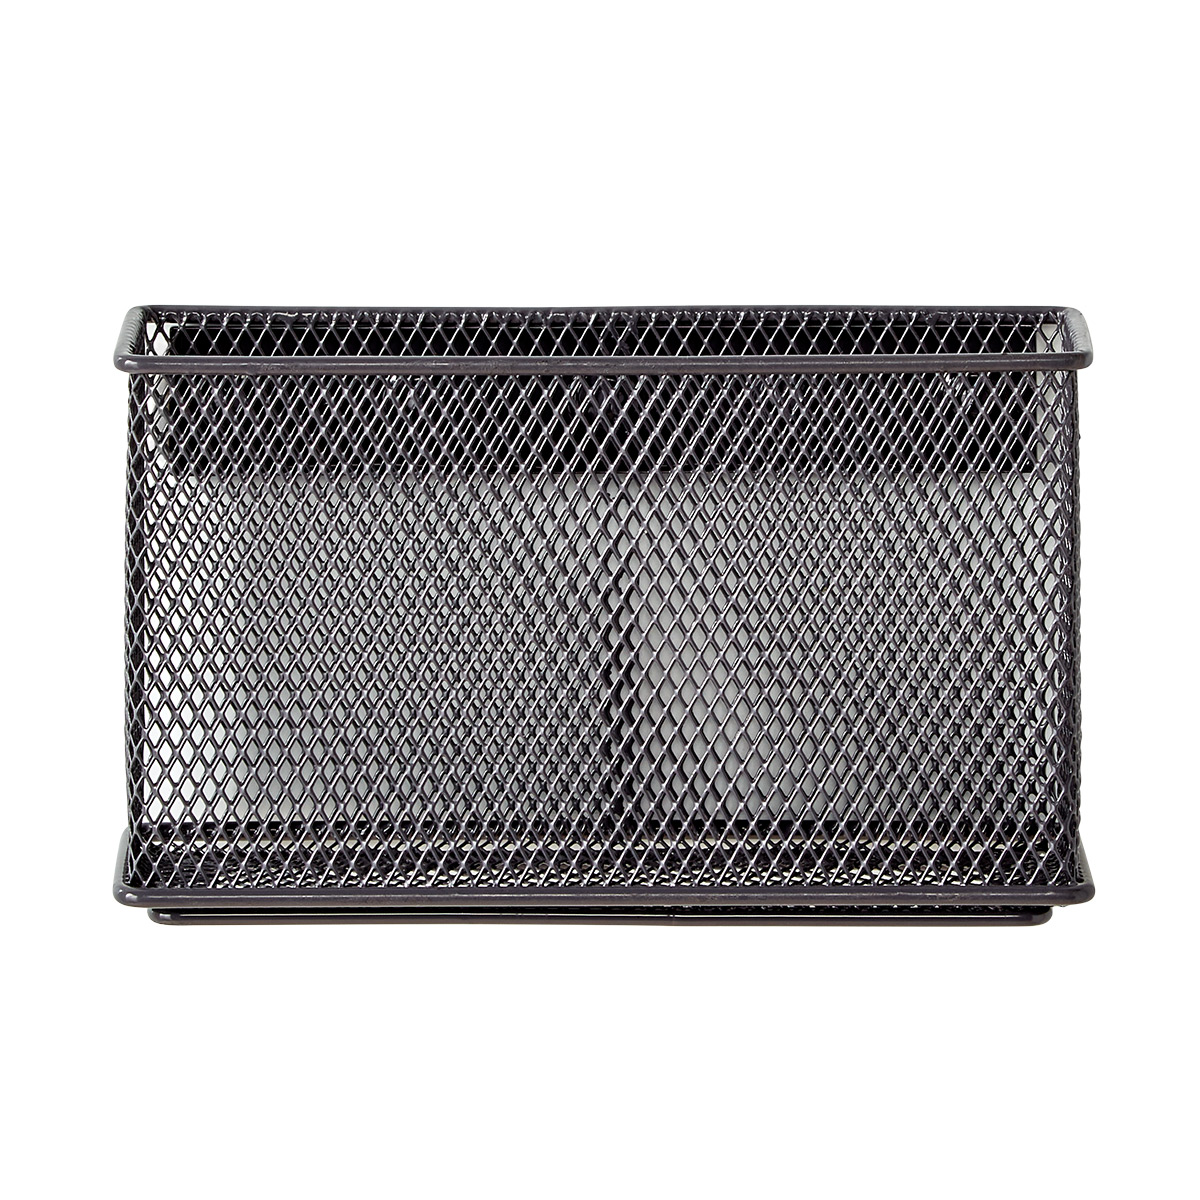 Mail Sorter & Mesh Desk Organizer - Silver Mesh Collection | The Container  Store